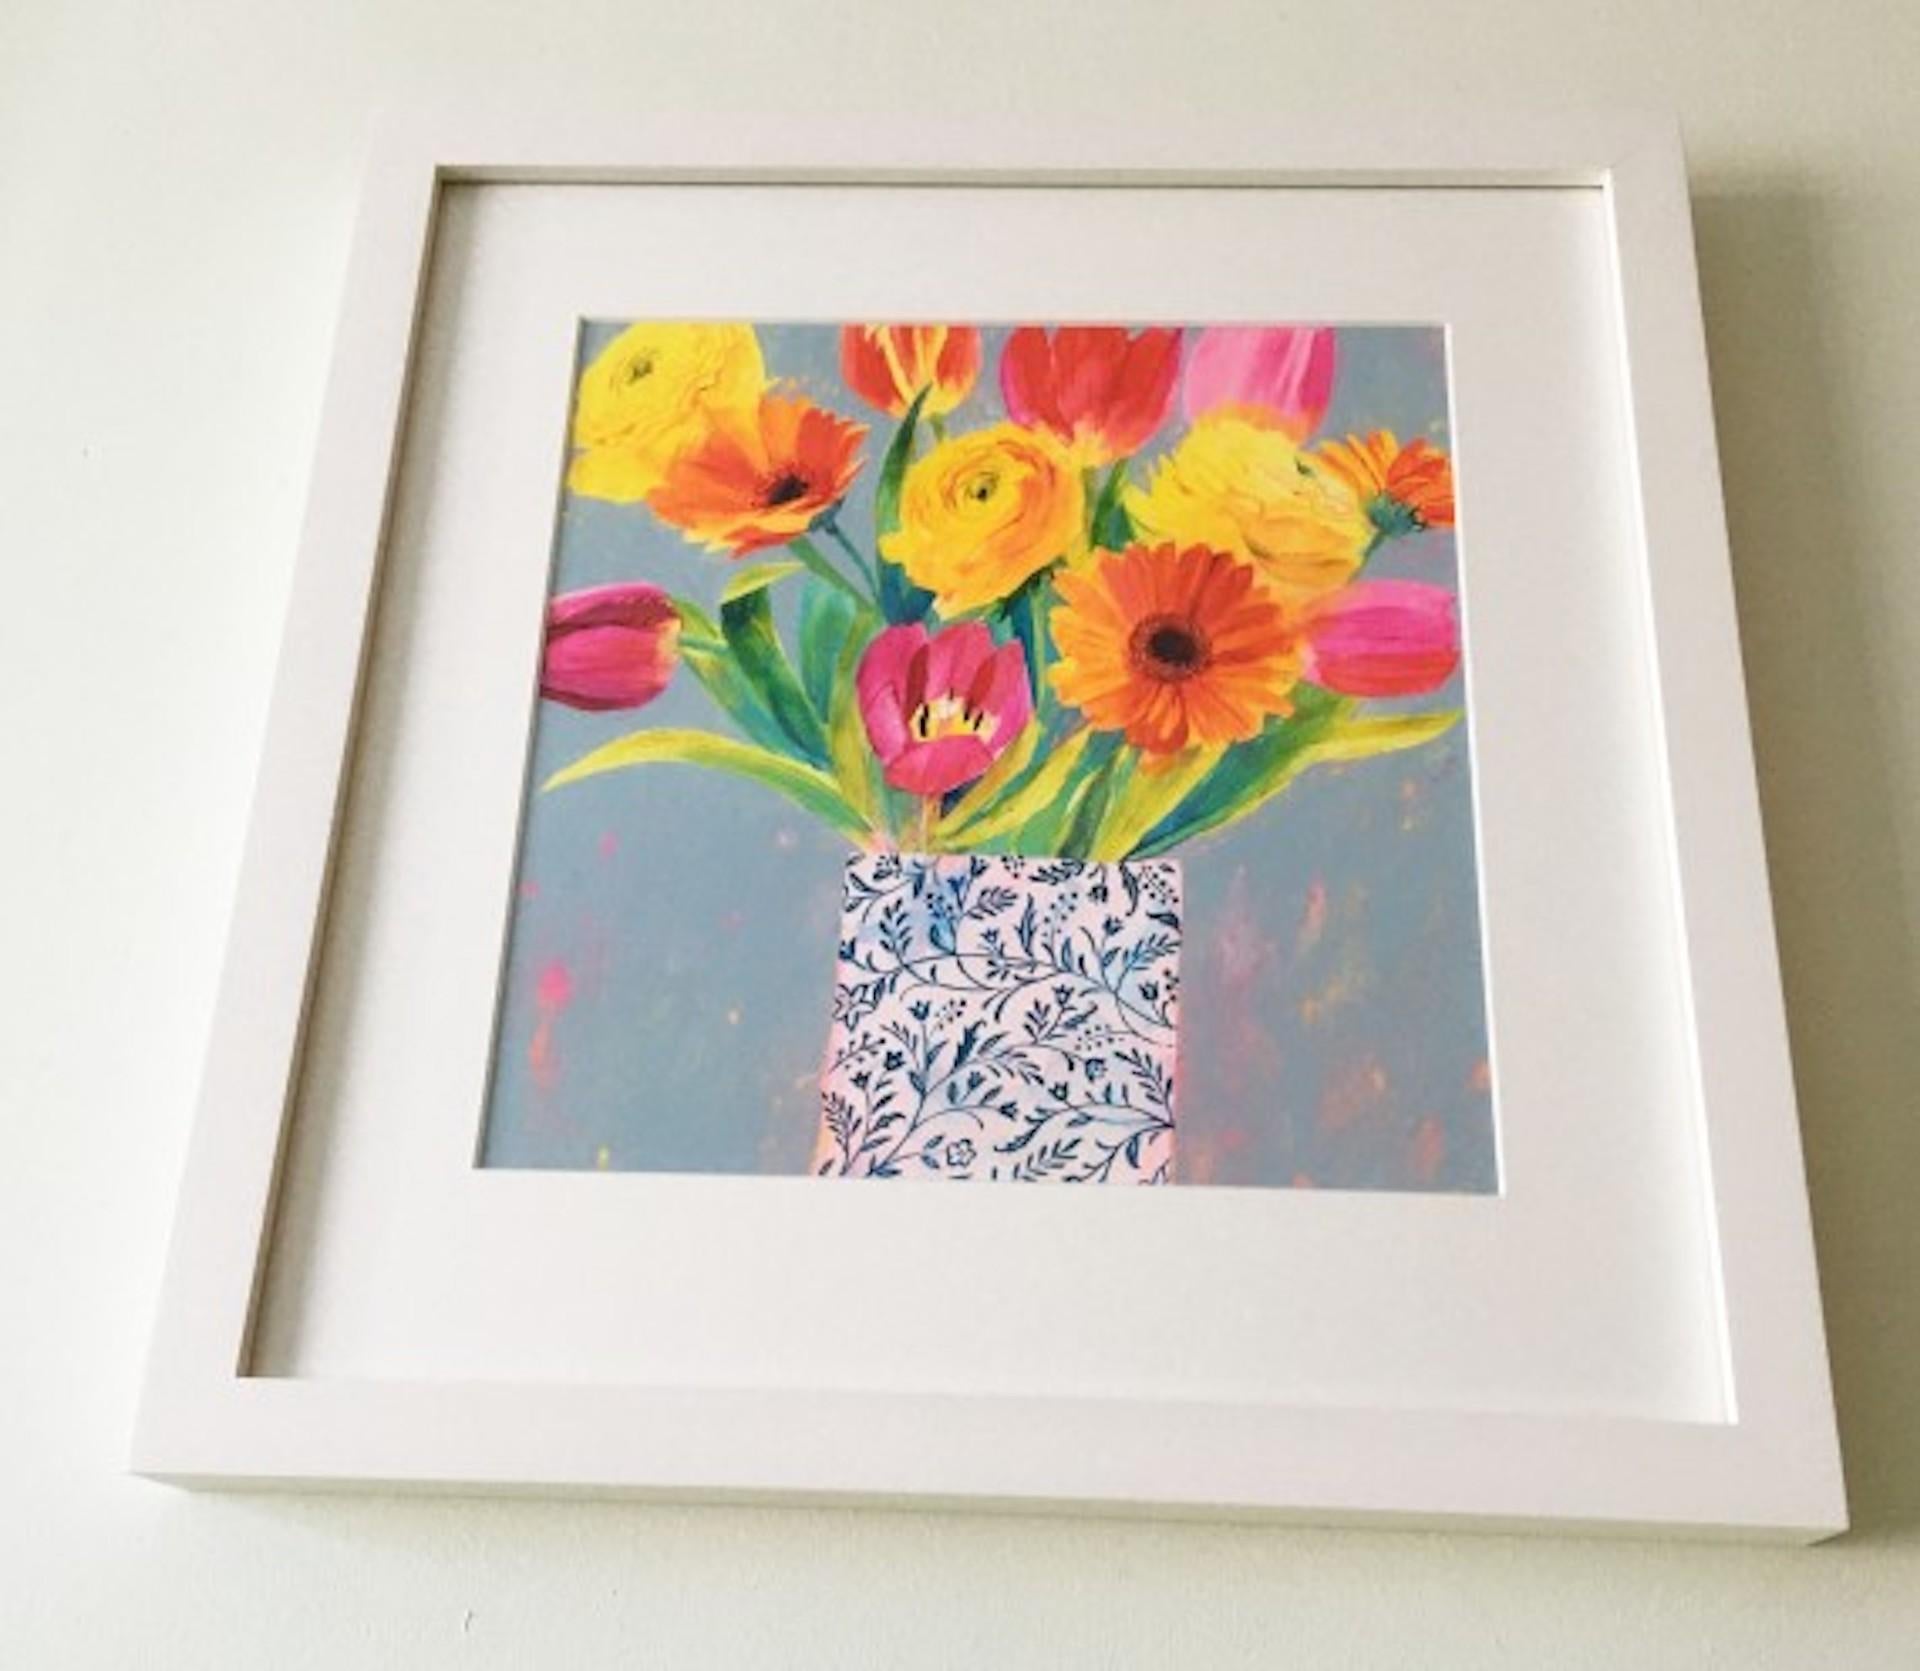 Spring’s Here [2021]
Original
Flowers
Acrylic on Board
Image size: H:25 cm x W:25 cm
Framed Size: H:40 cm x W:40 cm x D:4cm
Sold Framed
Please note that insitu images are purely an indication of how a piece may look

This Floral piece by Carolyn